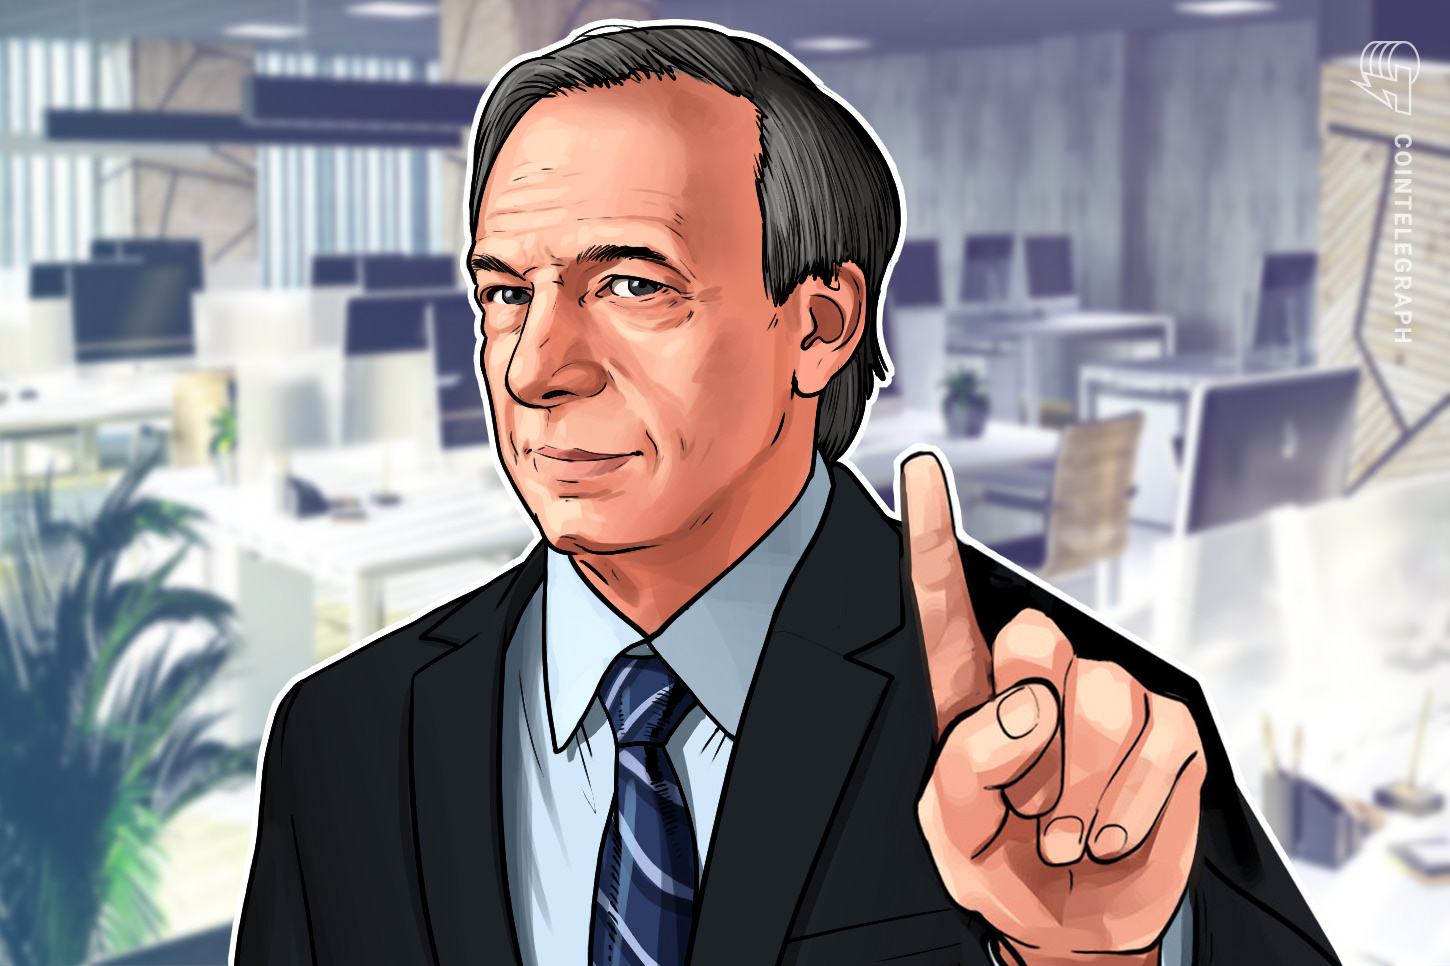 ‘A flood of cash and credit score’ — Ray Dalio new Bitcoin reward echoes MicroStrategy